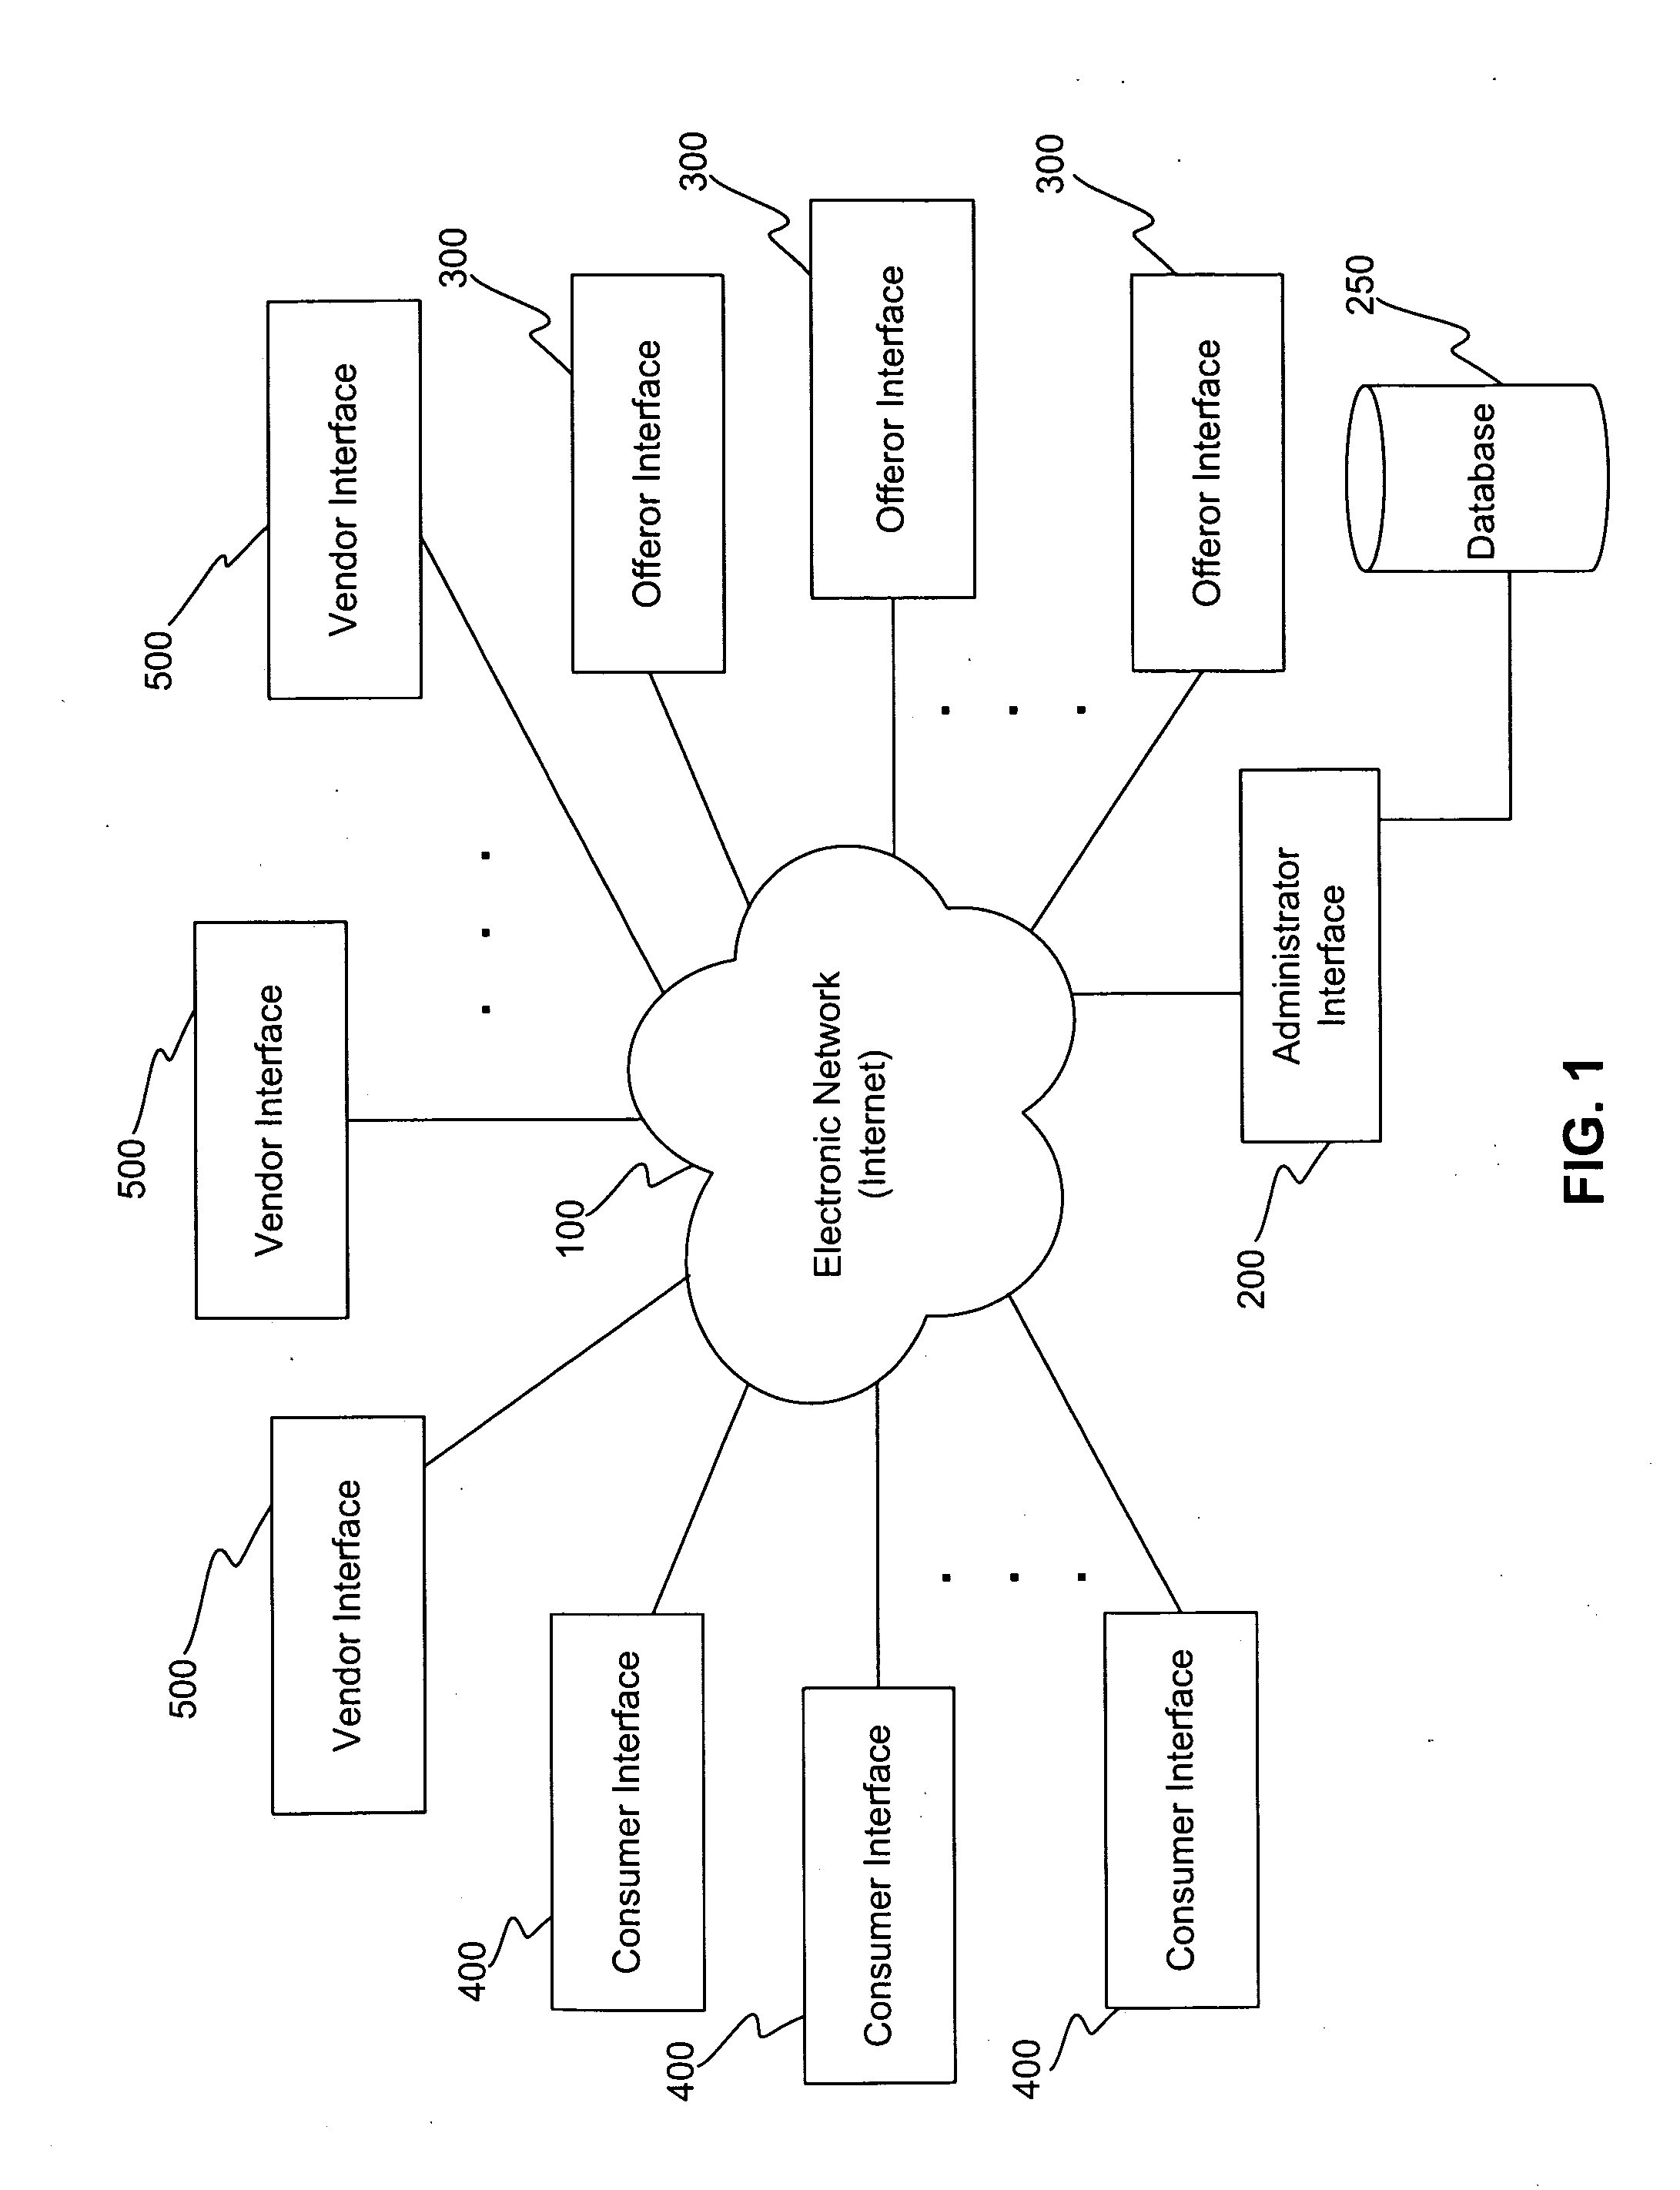 Methods and systems for generating product offers over electronic network systems